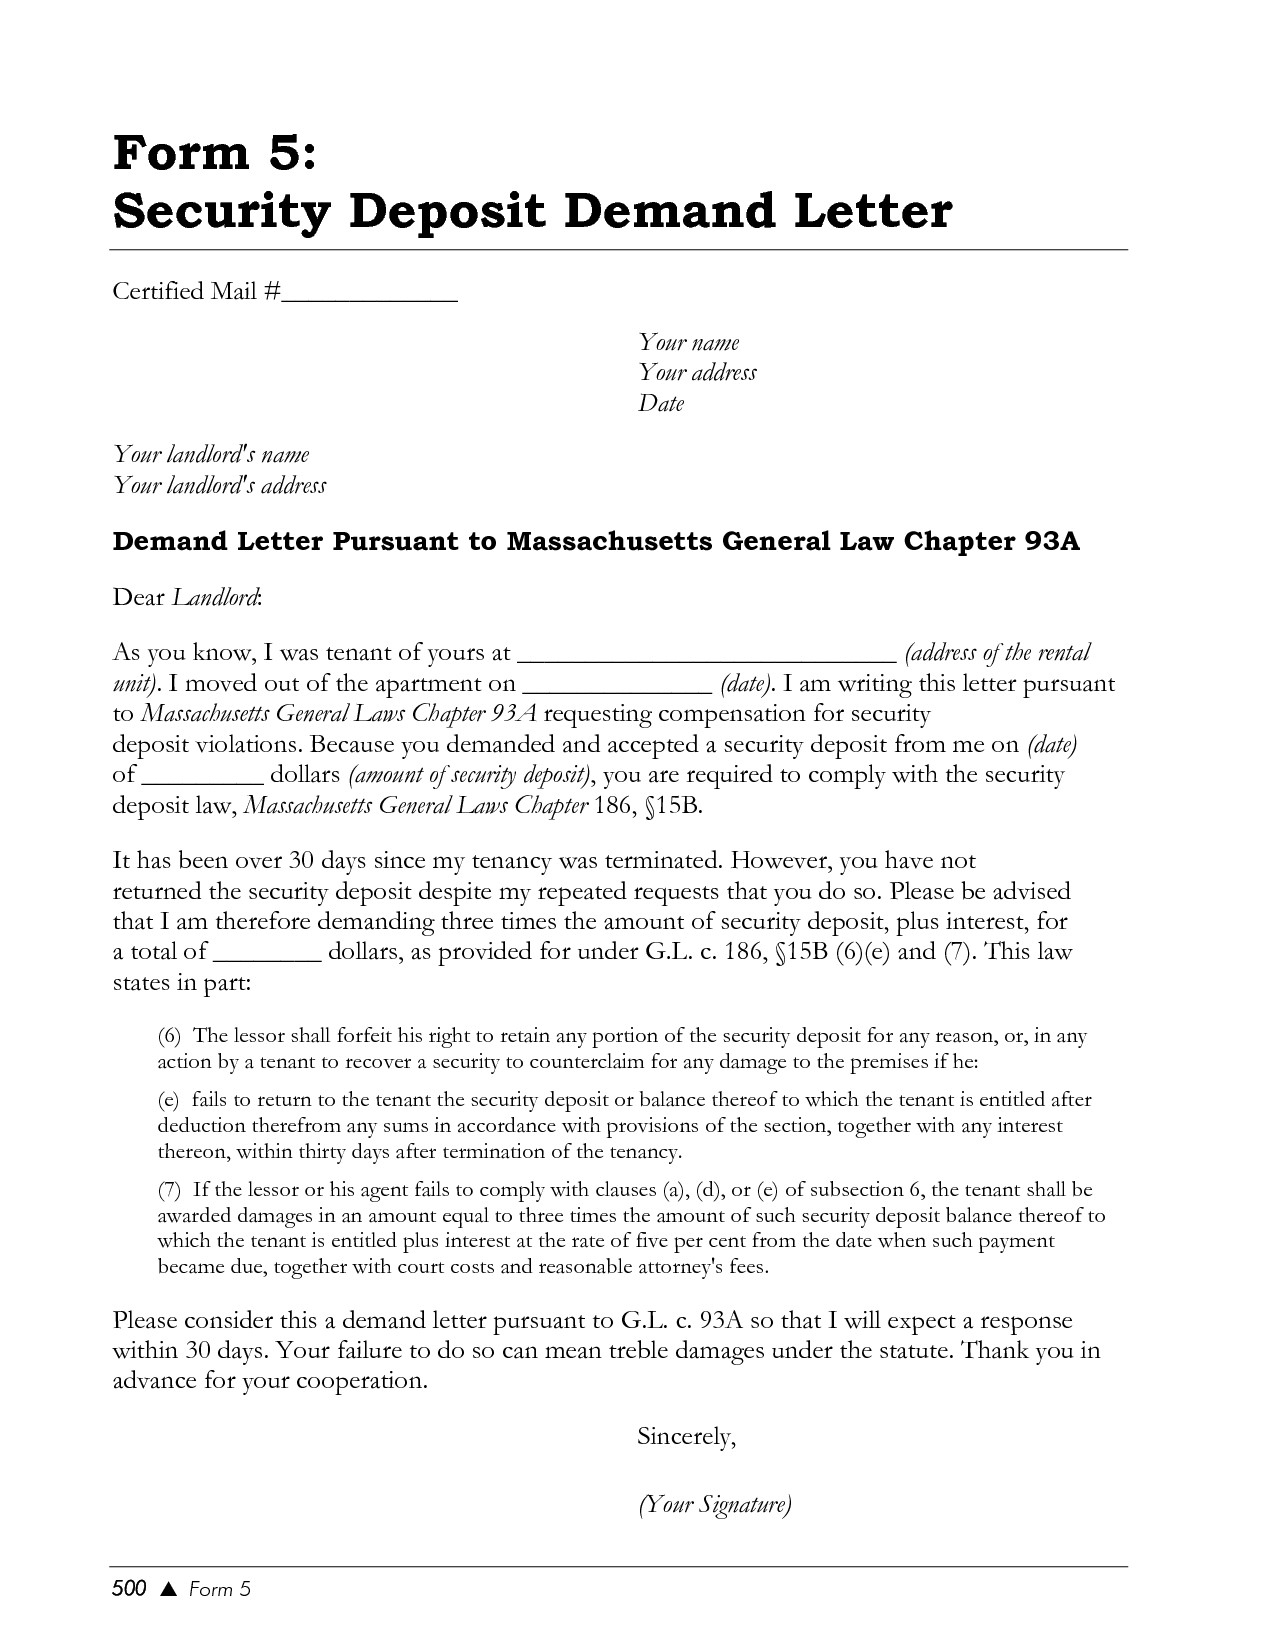 Sample security deposit demand letter With Security Deposit Demand Letter Template Pertaining To Security Deposit Demand Letter Template